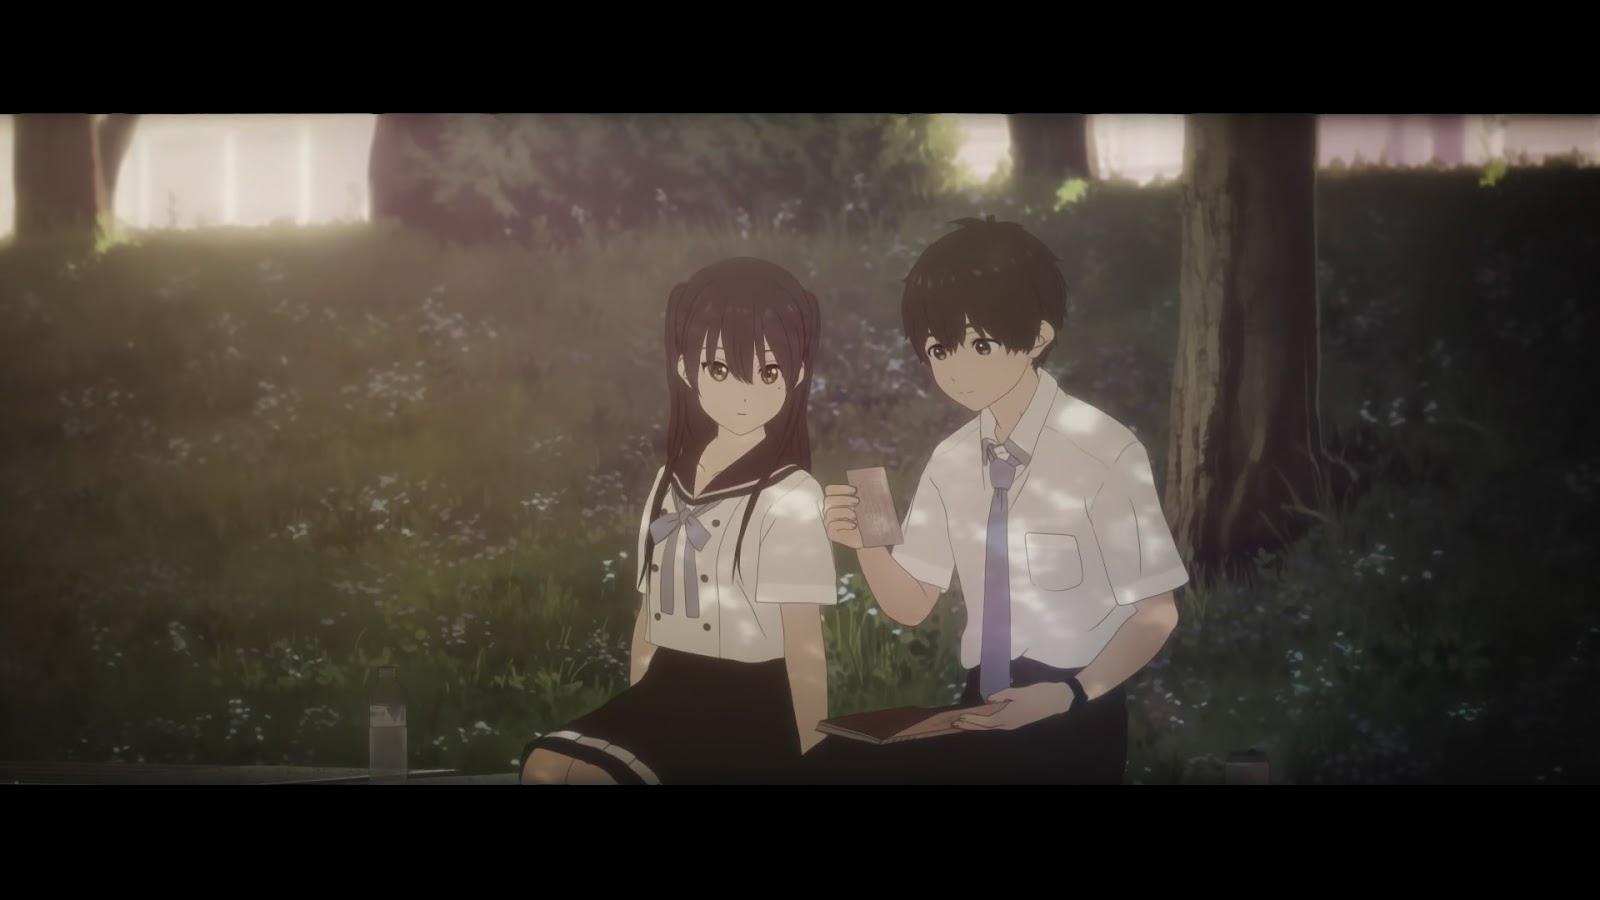 Another World Episode 1 - Record 2027 BD Subtitle Indonesia